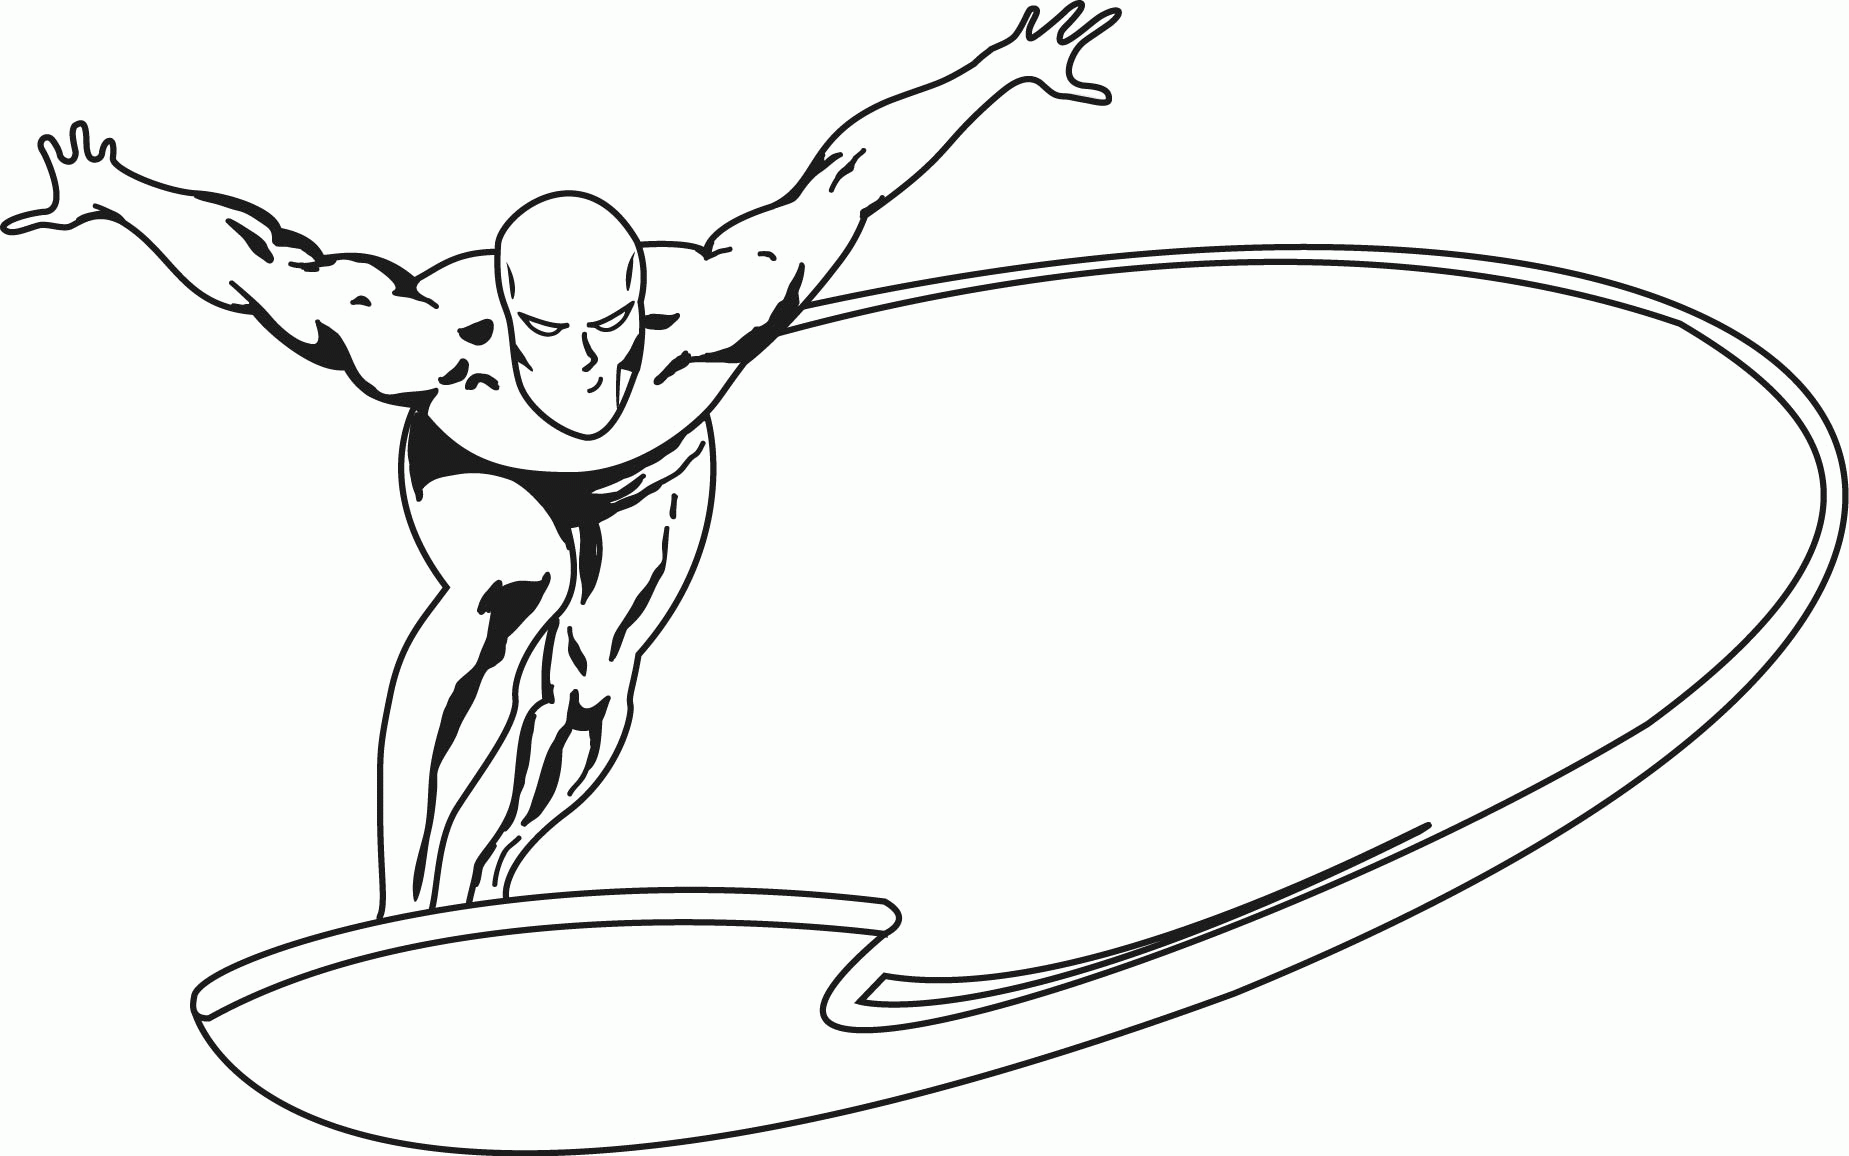 Unique Free Silver Surfer Coloring Pages | Top Free Coloring Pages For Kids